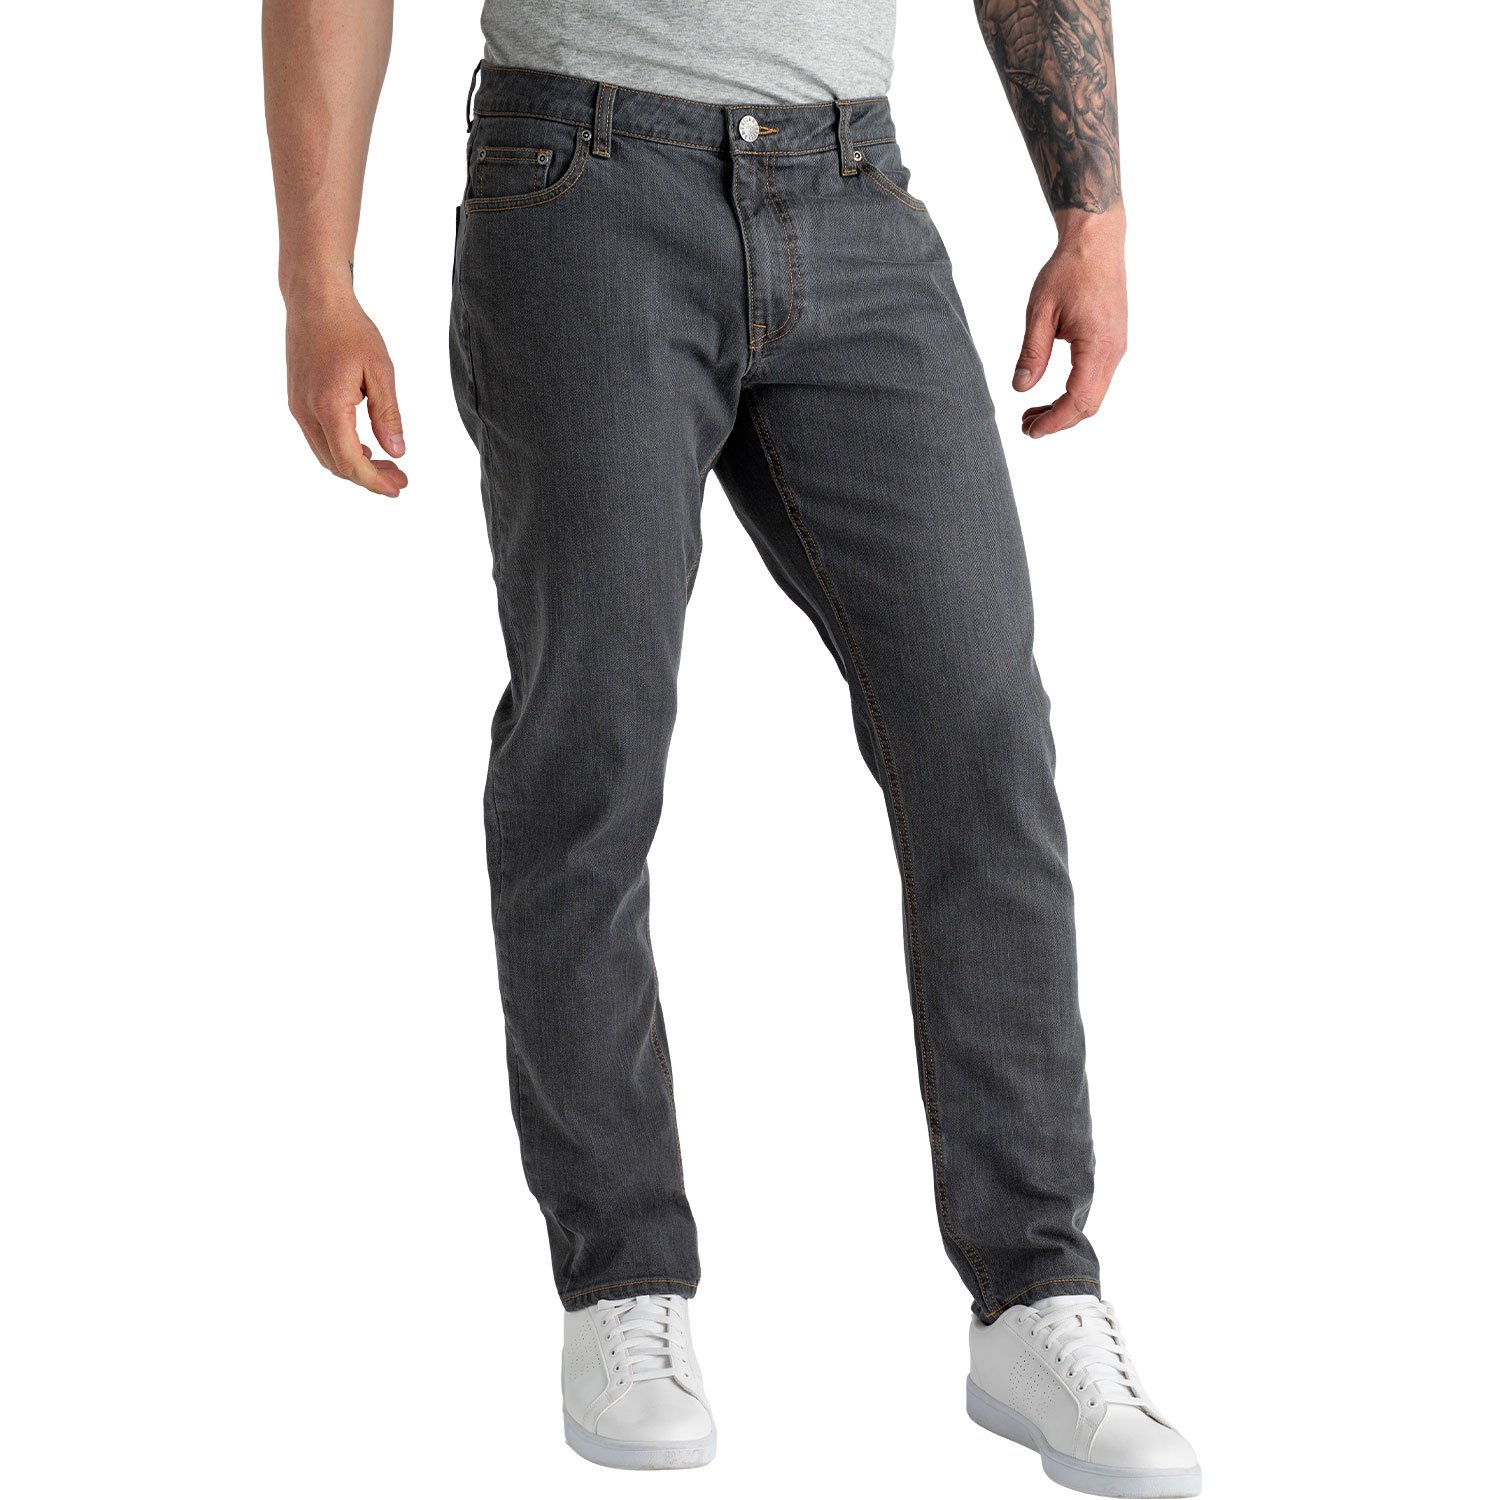 Carman TAPERED FIT Tall Men's Jeans in Grey